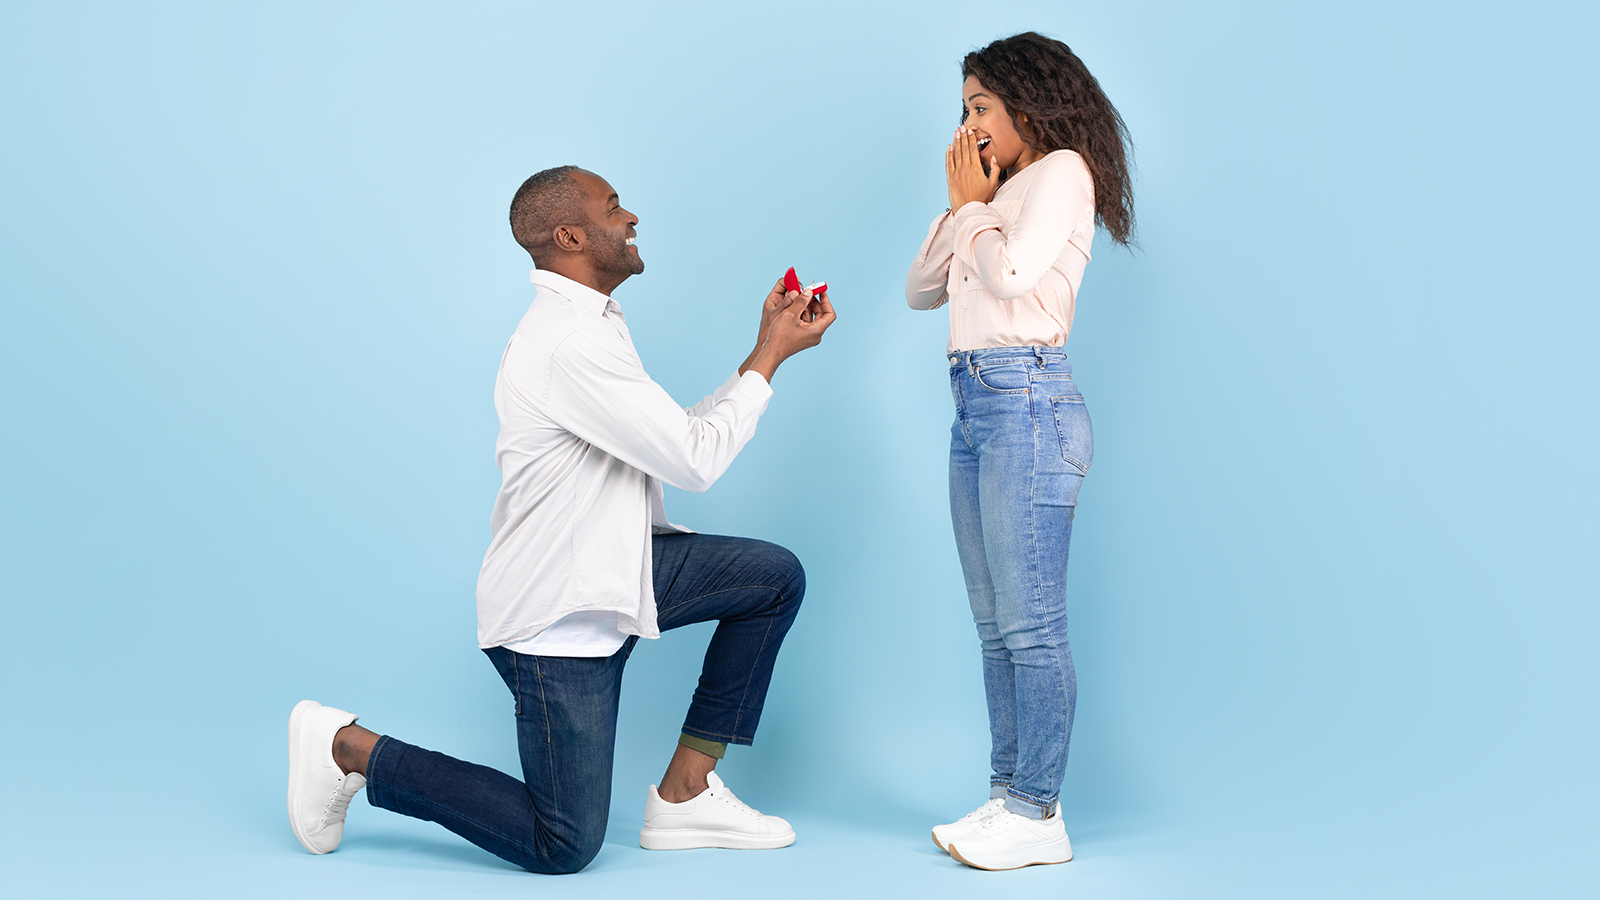 Marry me. Black middle aged man holding giving open box with engagement ring to excited young woman, asking her to be his wife during romantic date standing on one knee, blue studio background